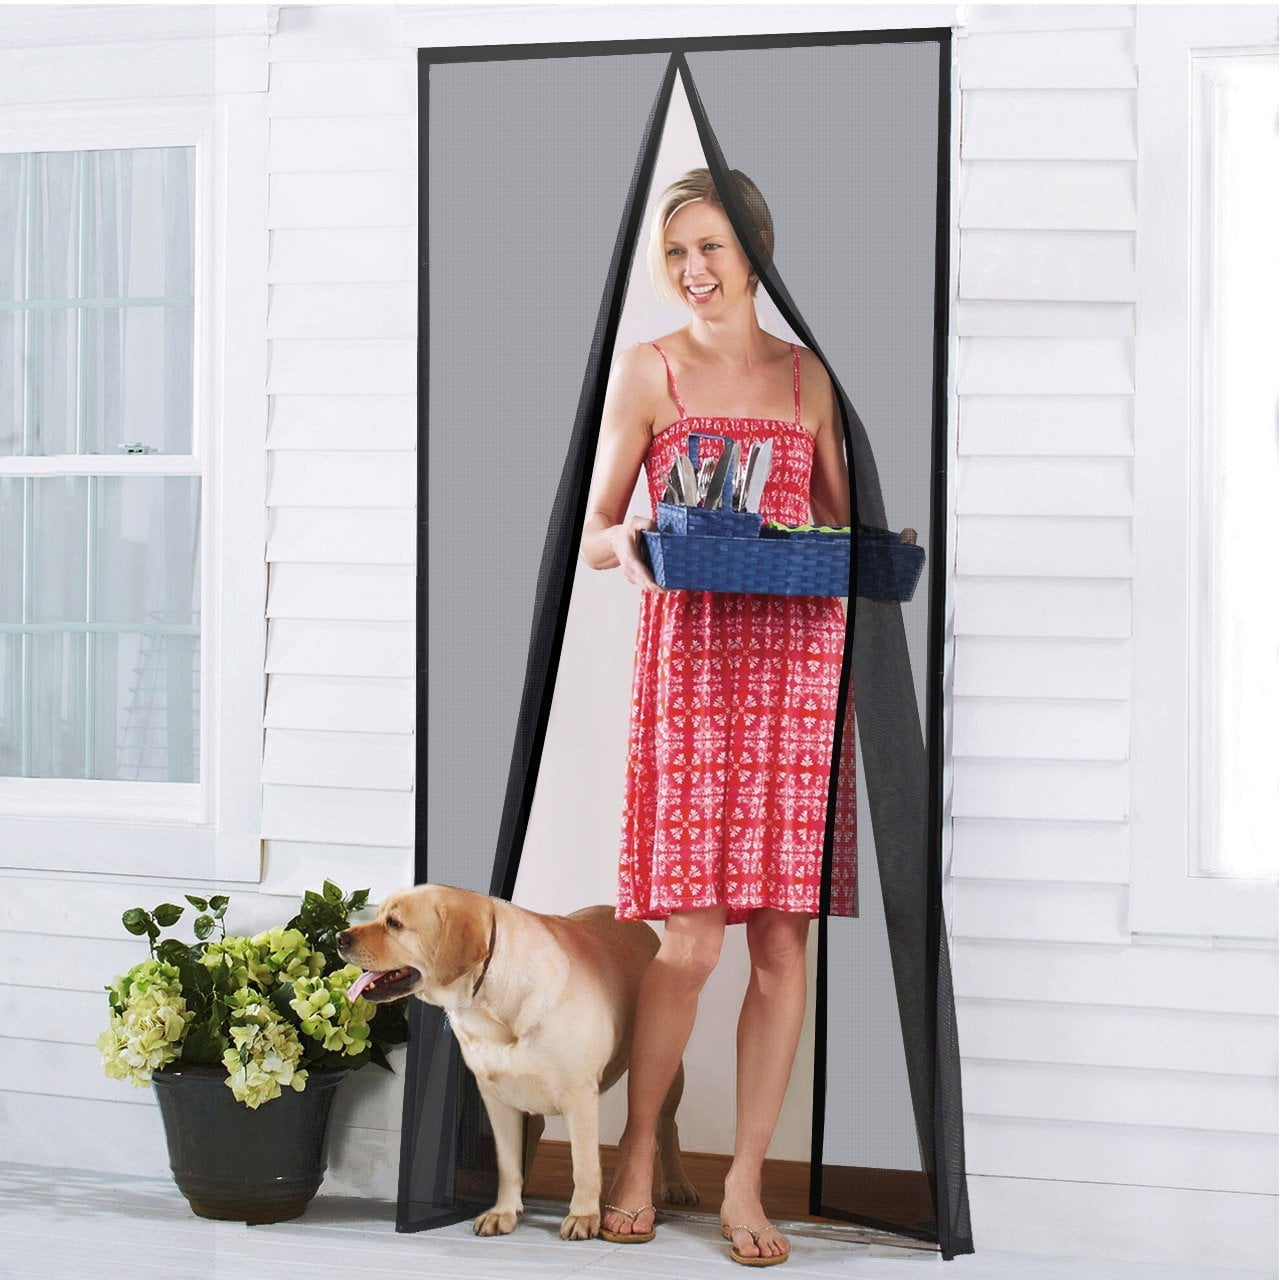 Fly Screen Mosquito Door Curtain Hand Free Dandelion Mesh Magnetic Snap Blue AU 